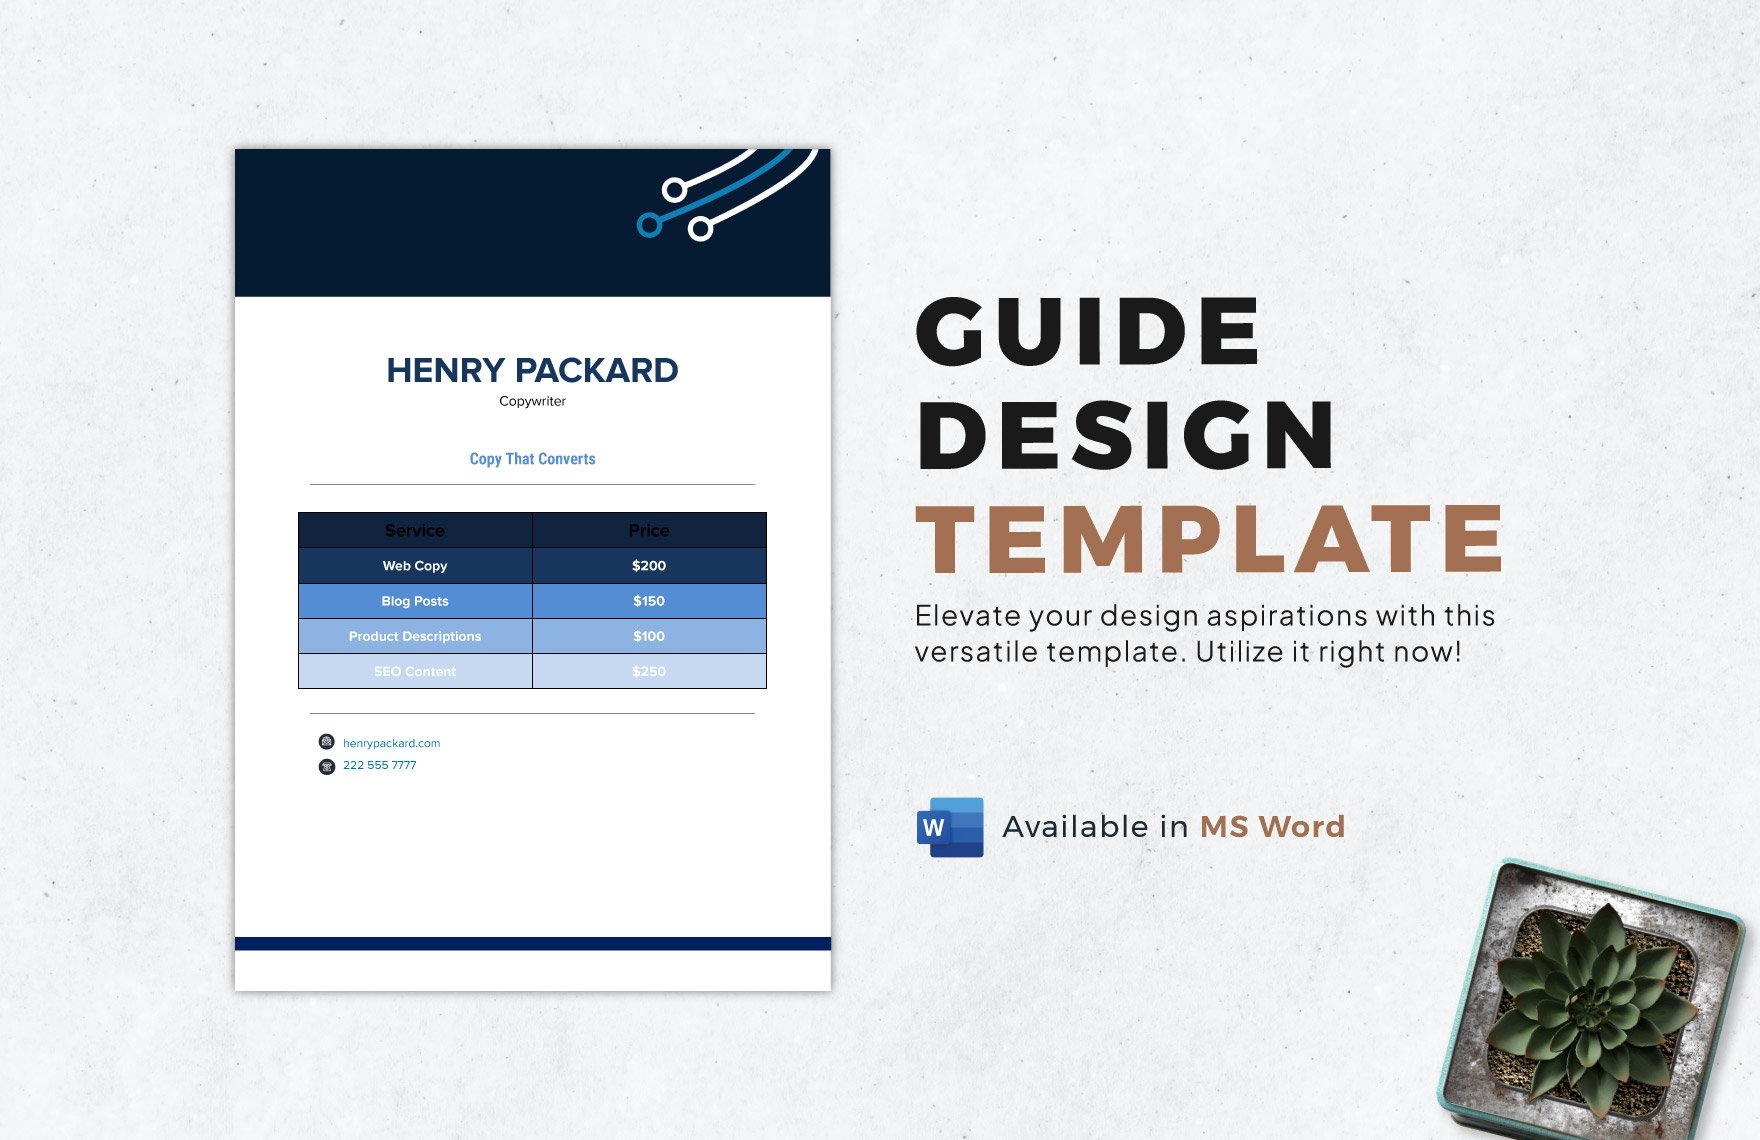 Guide Design Template in Word